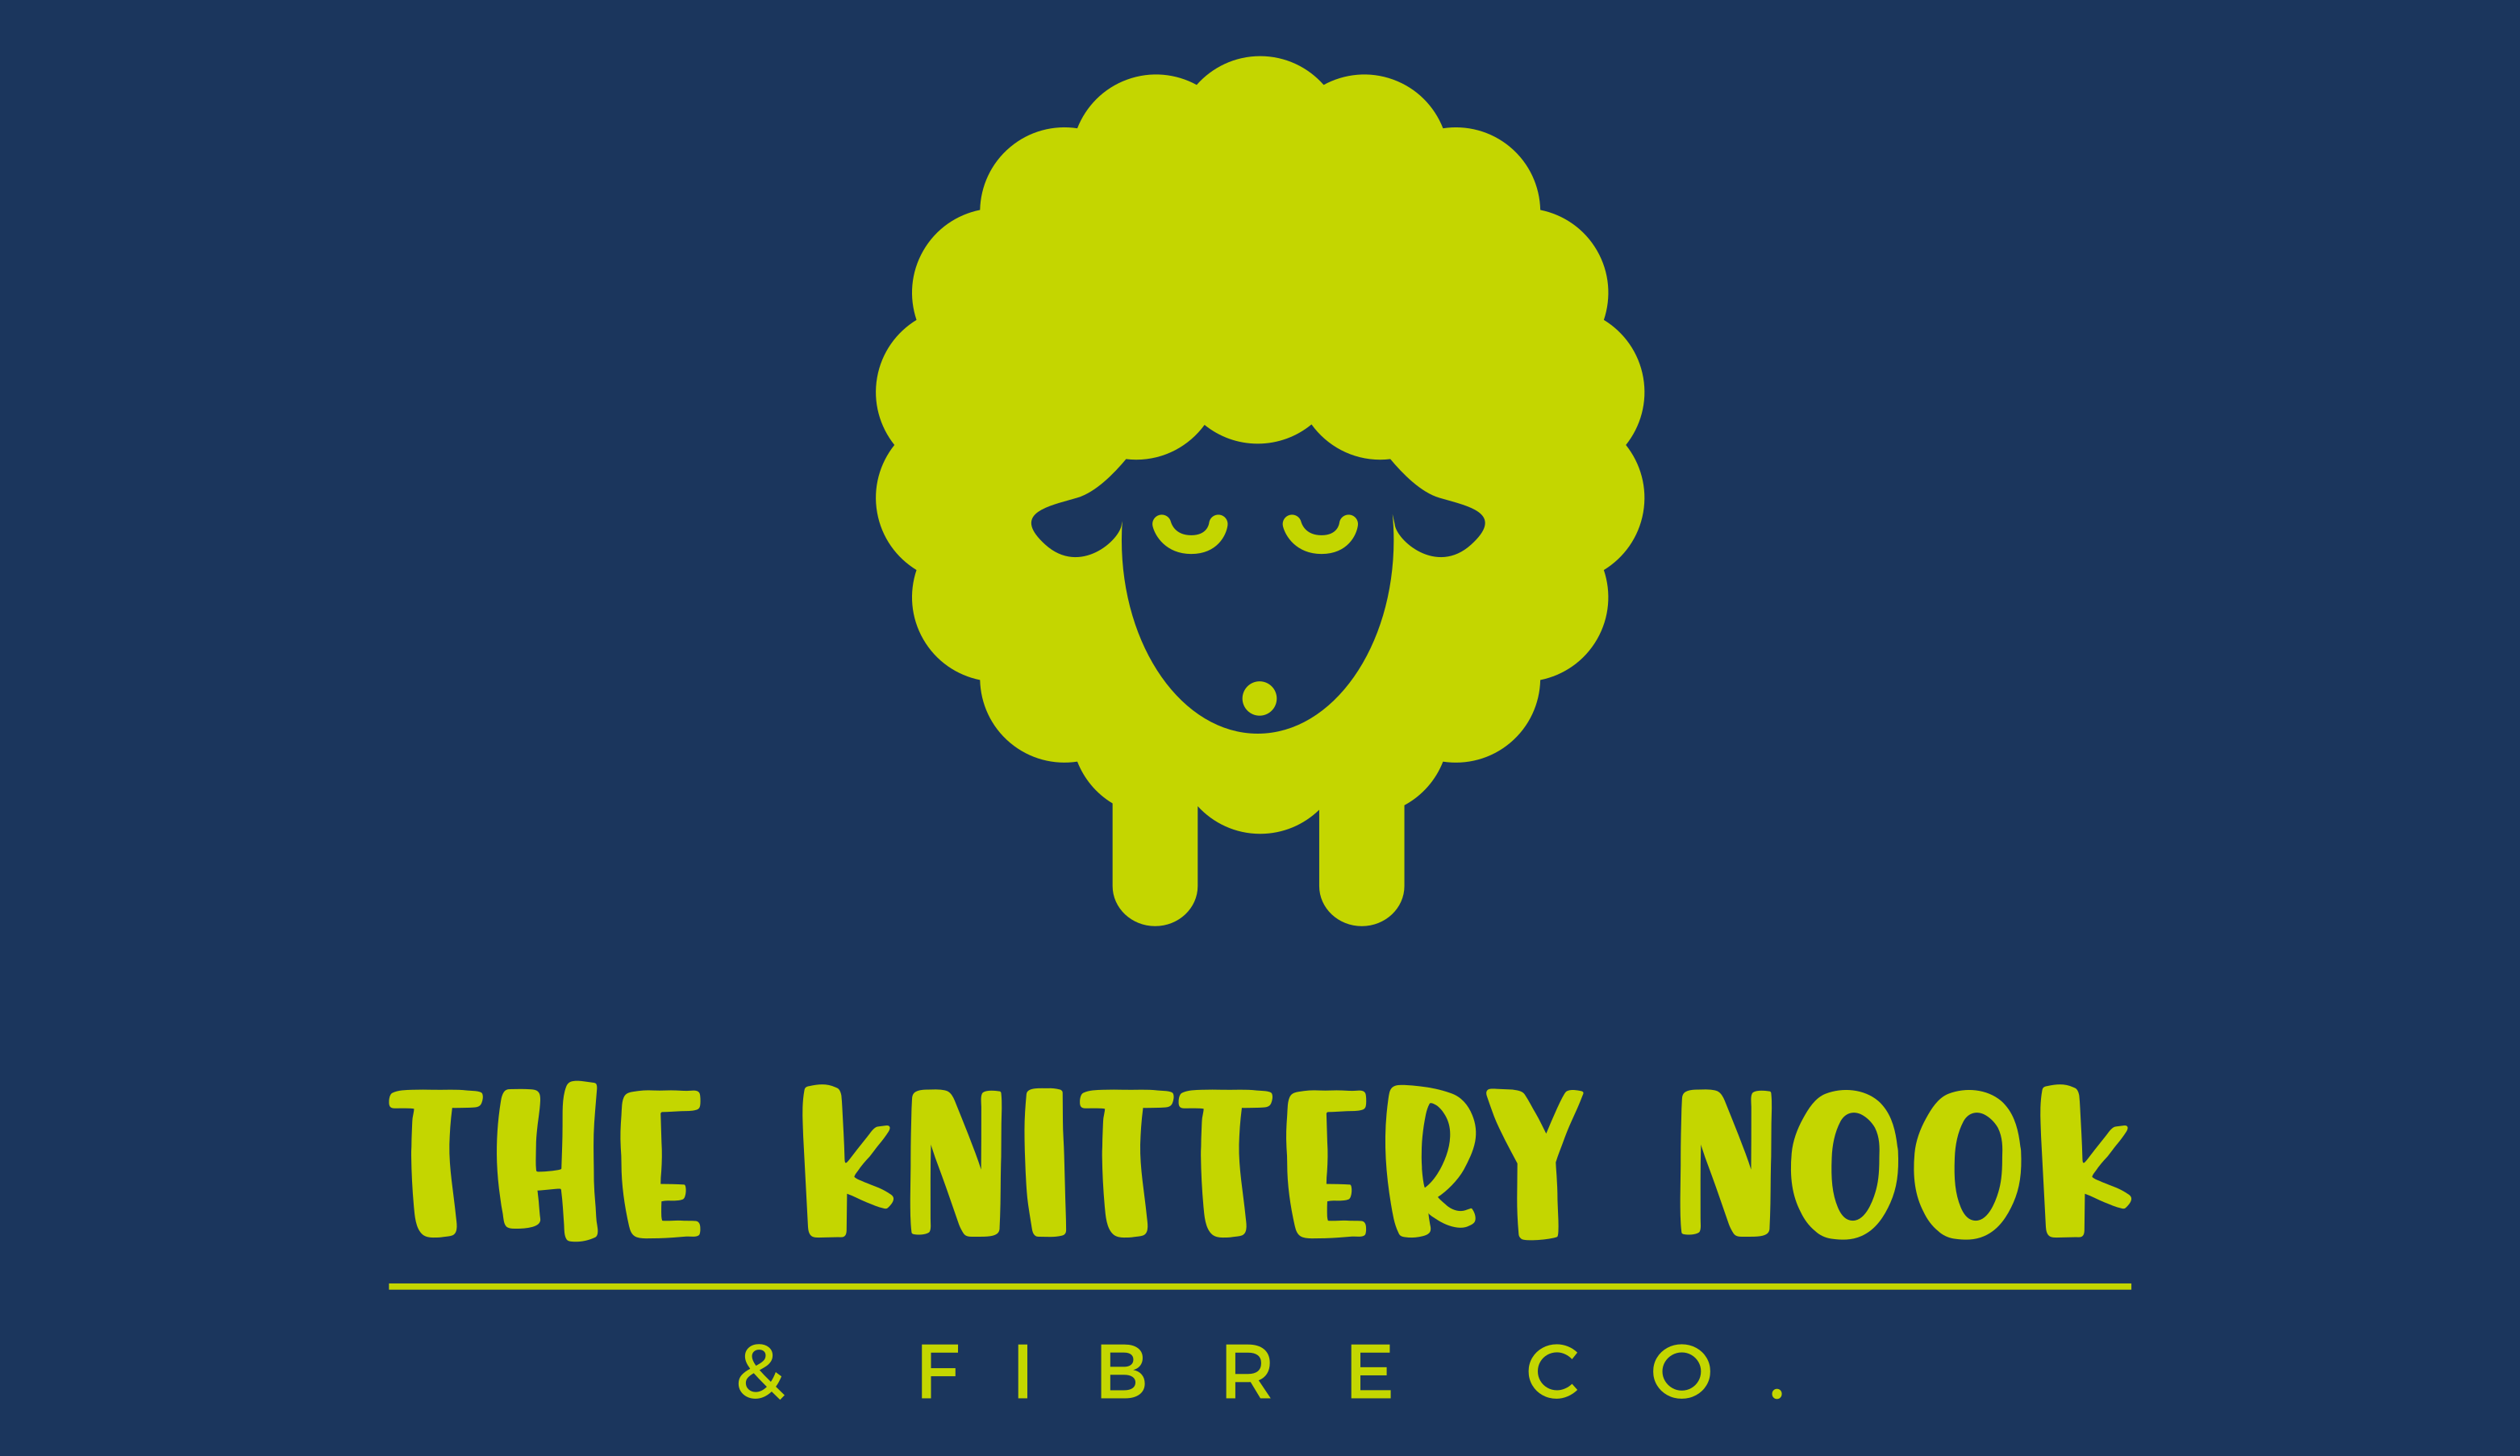 The Knittery Nook